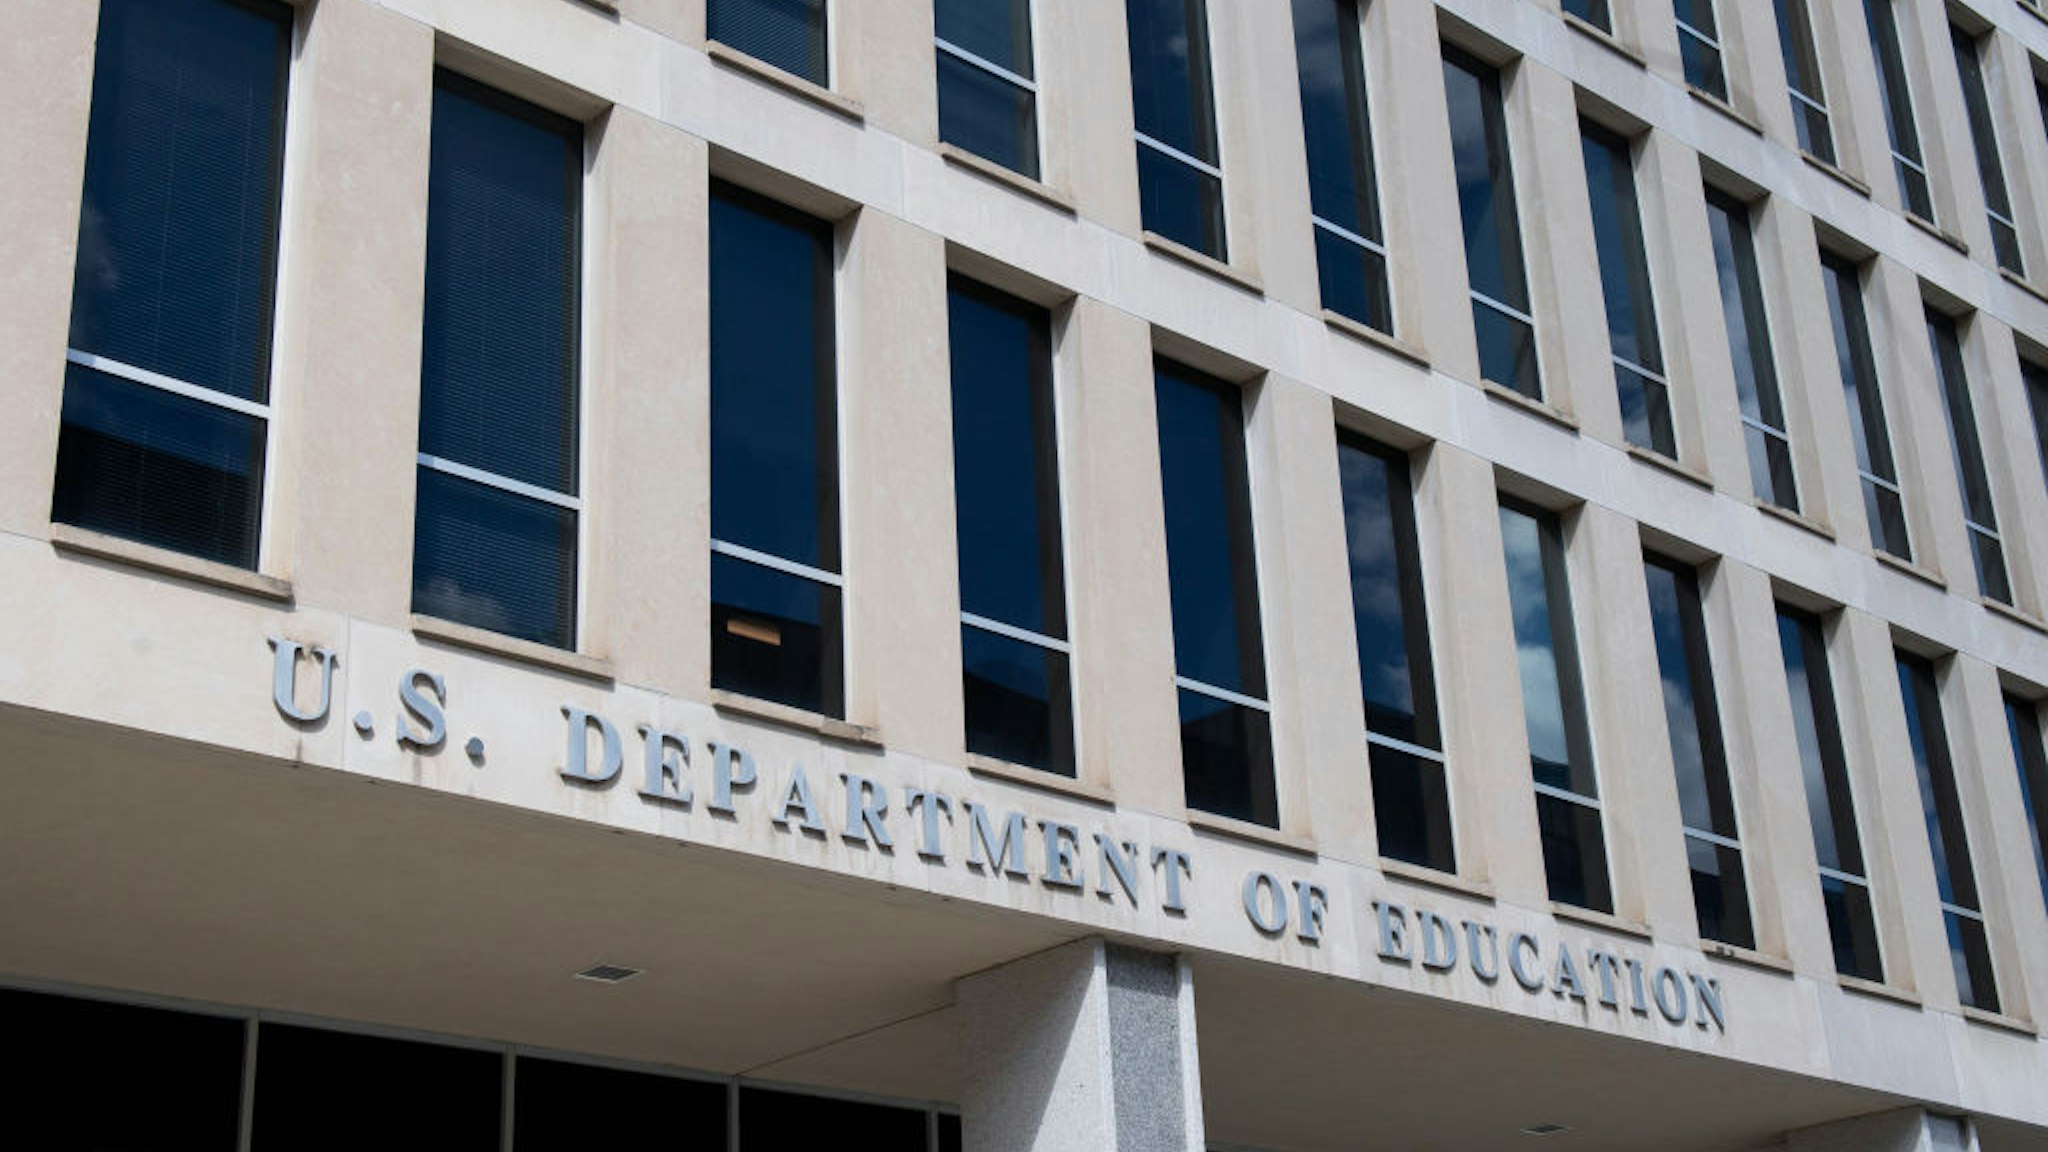 UNITED STATES - APRIL 2: The U.S. Department of Education building is pictured in Washington on Thursday, April 2, 2020.